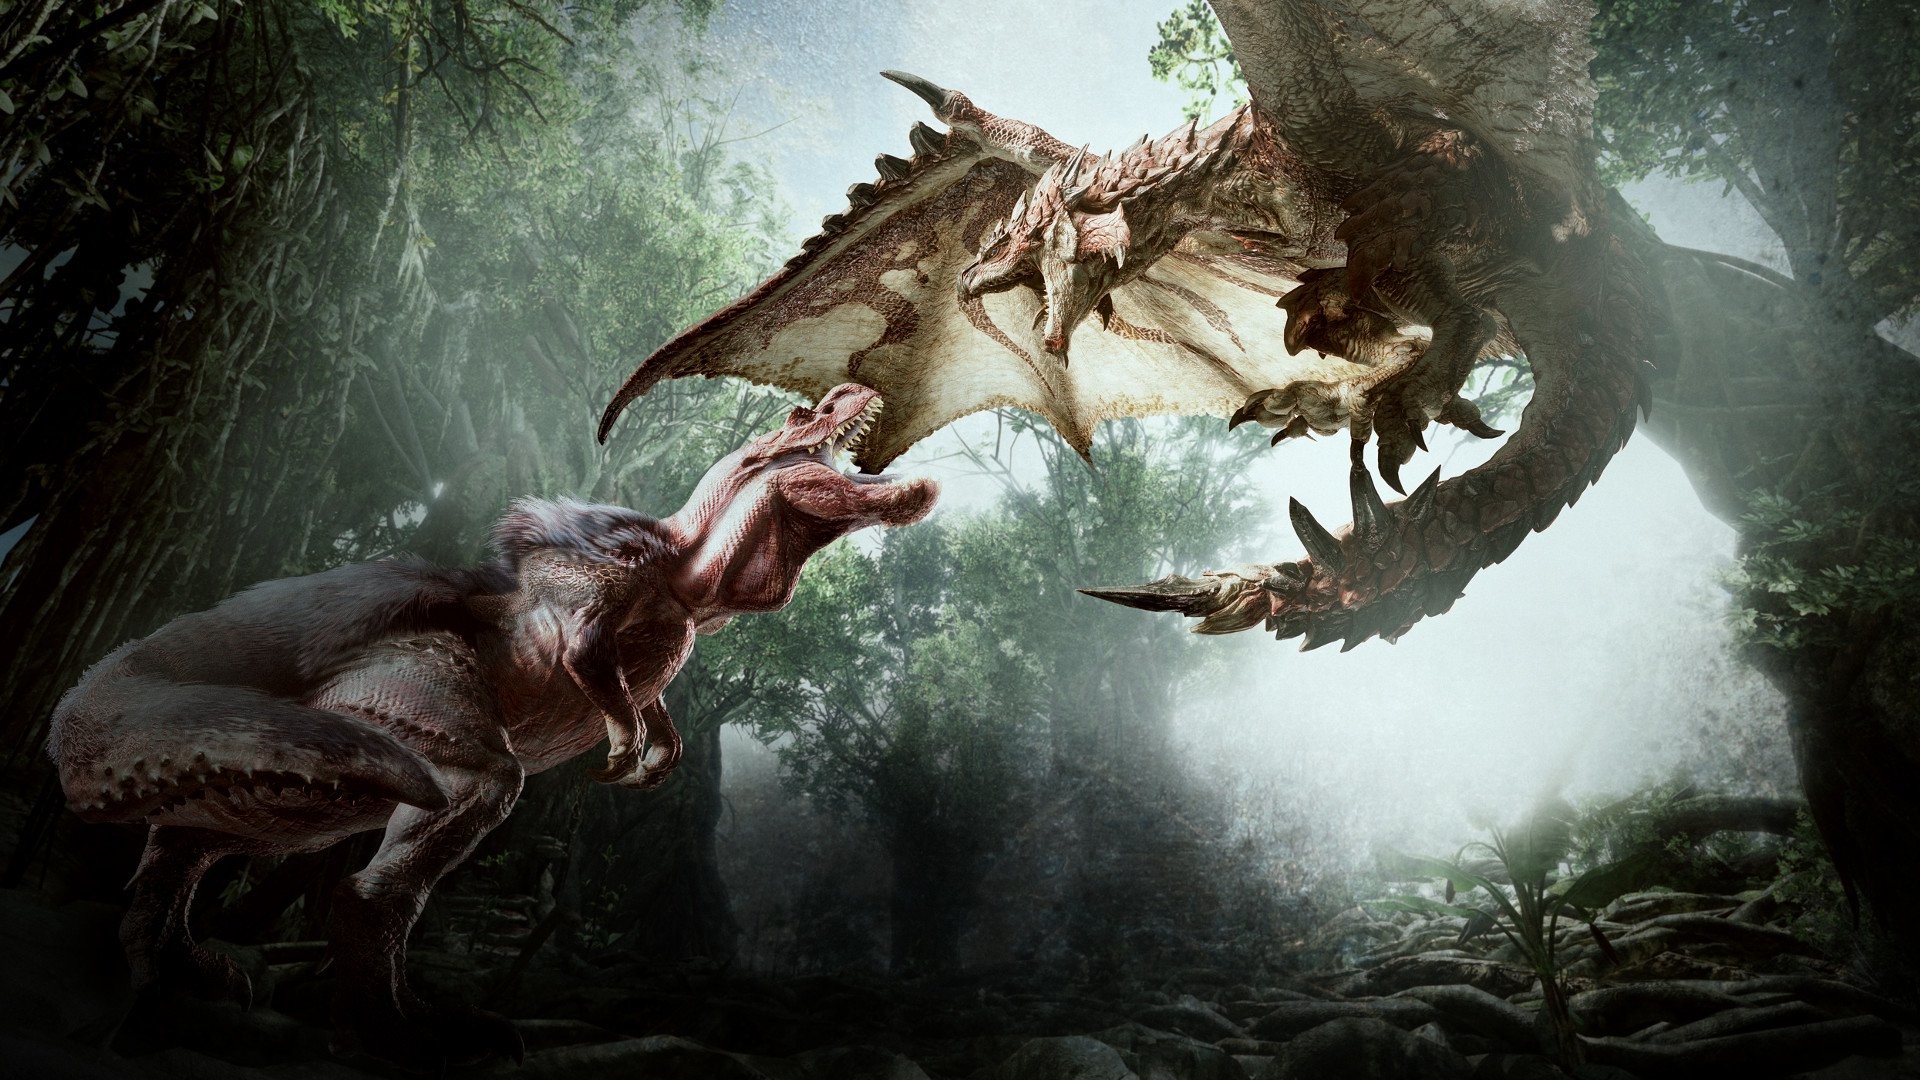 1920x1080 How do you think Monster Hunter: World will fare? Let me know in the  comments!